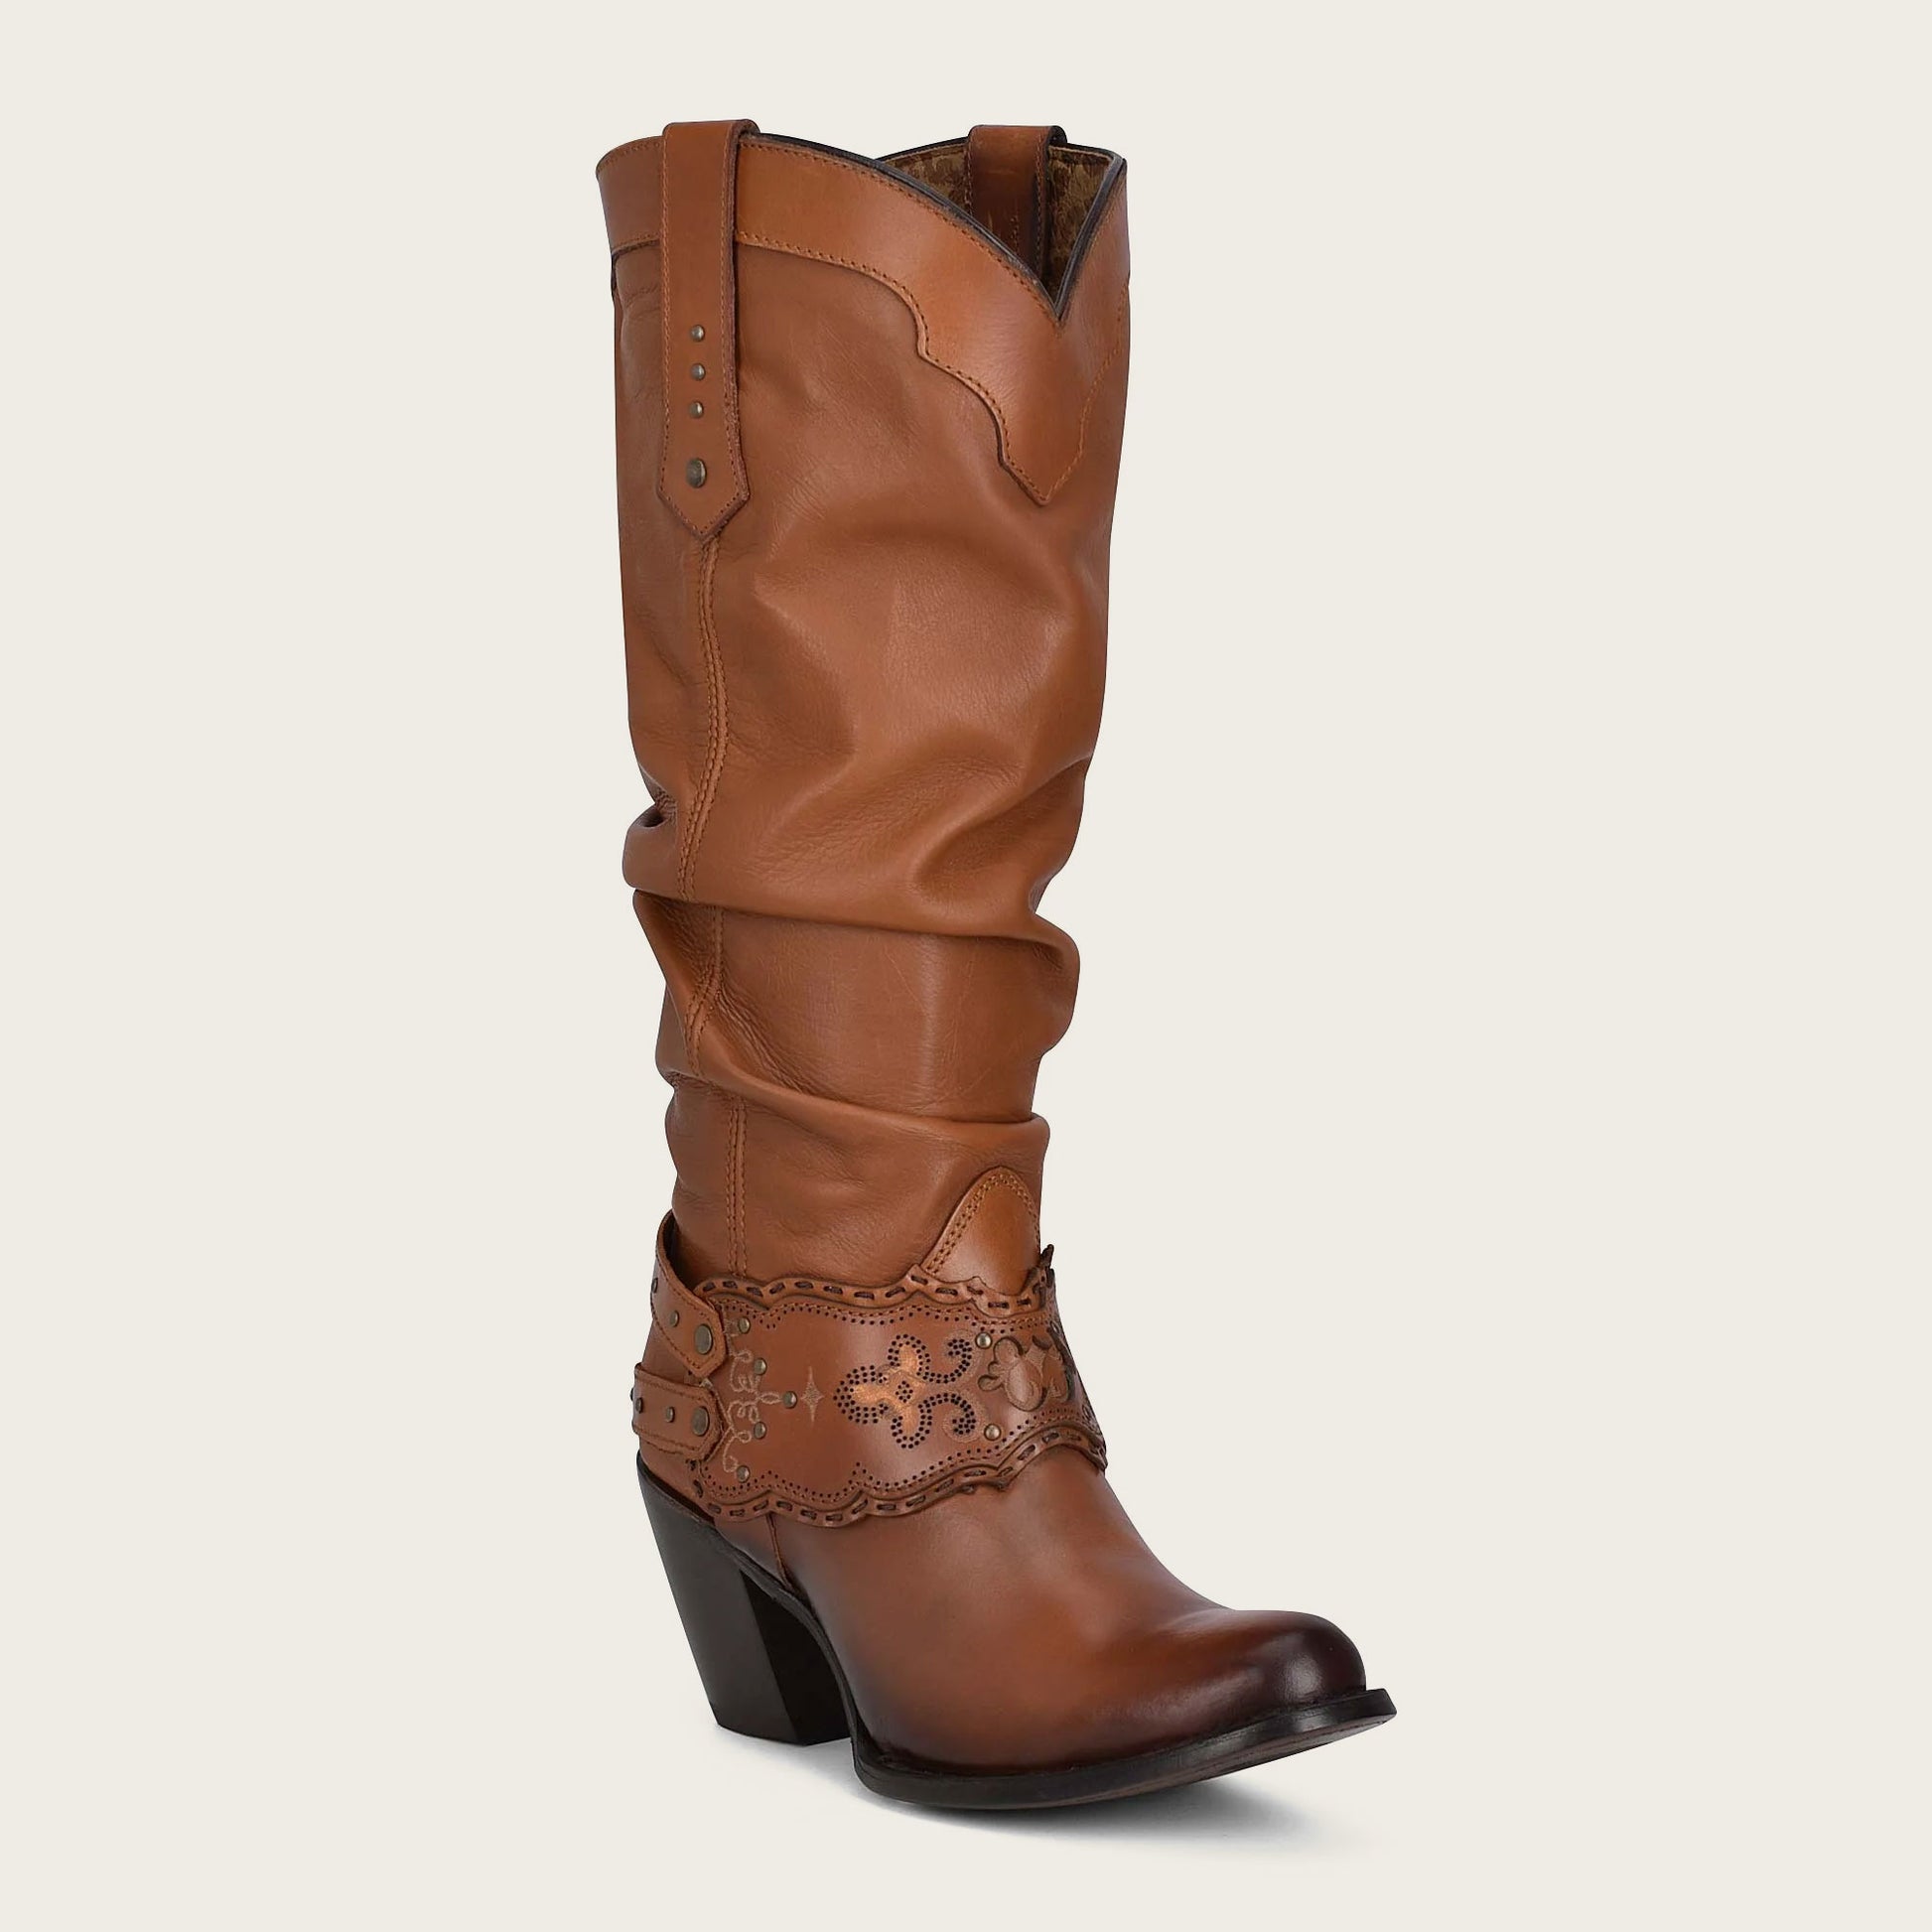 Step out in style with our honey leather boot, complete with beautiful engravings and a sleek silhouette.